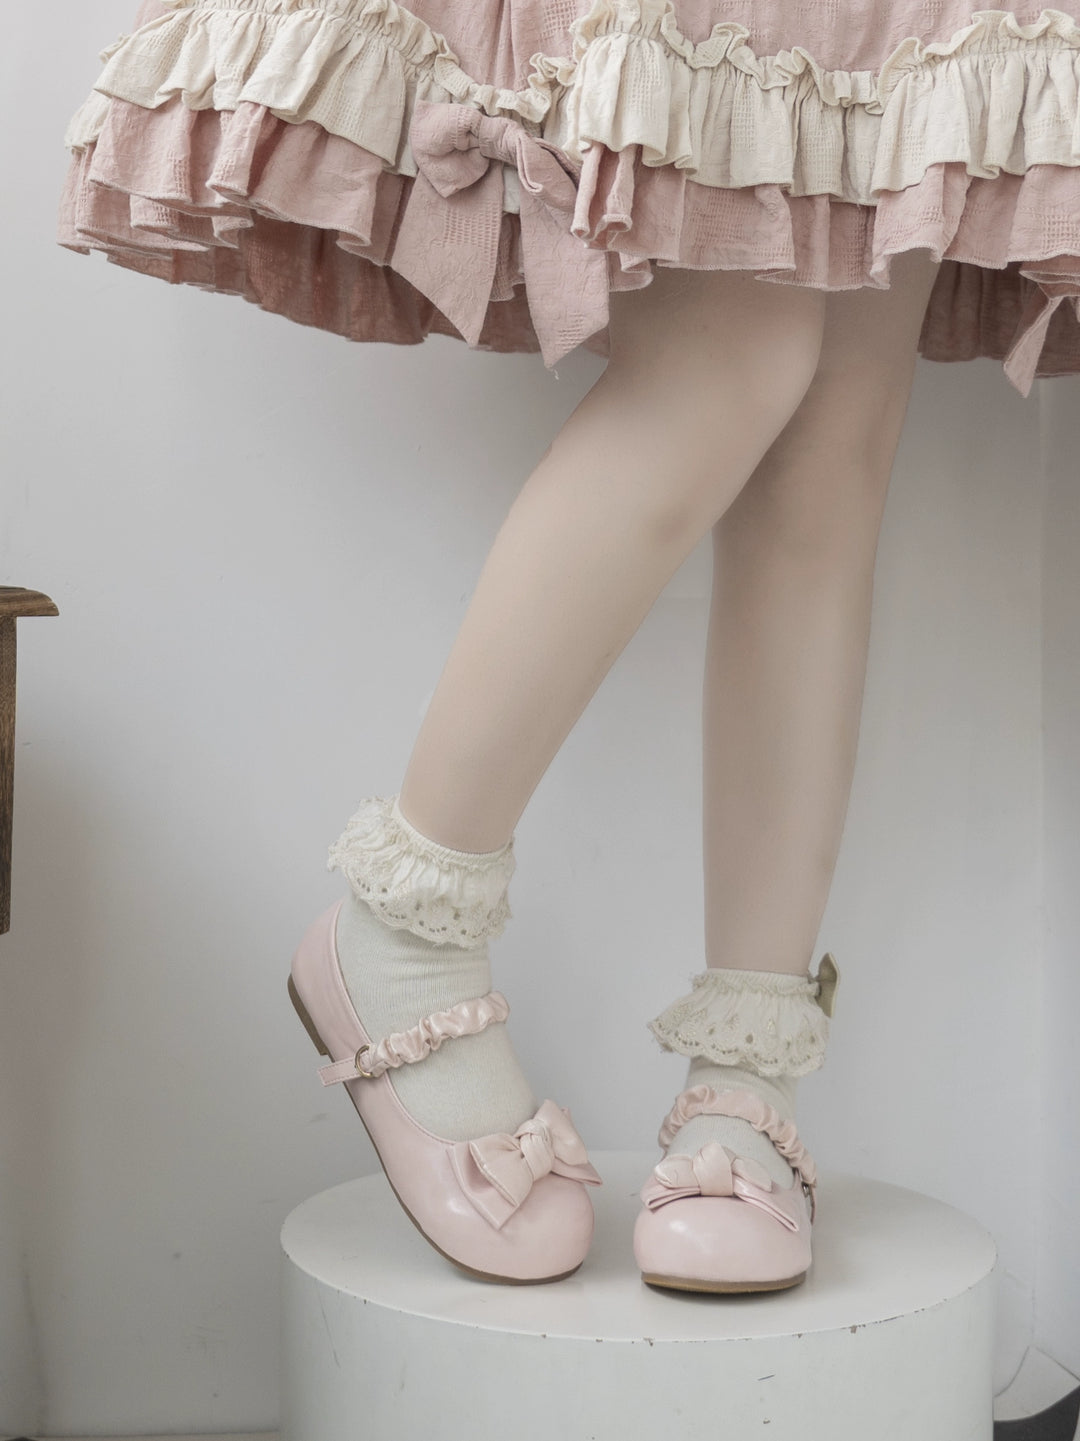 Dolly Doll~Sweet Lolita Shoes Round Toe Bow Low Heel Flat Shoes   